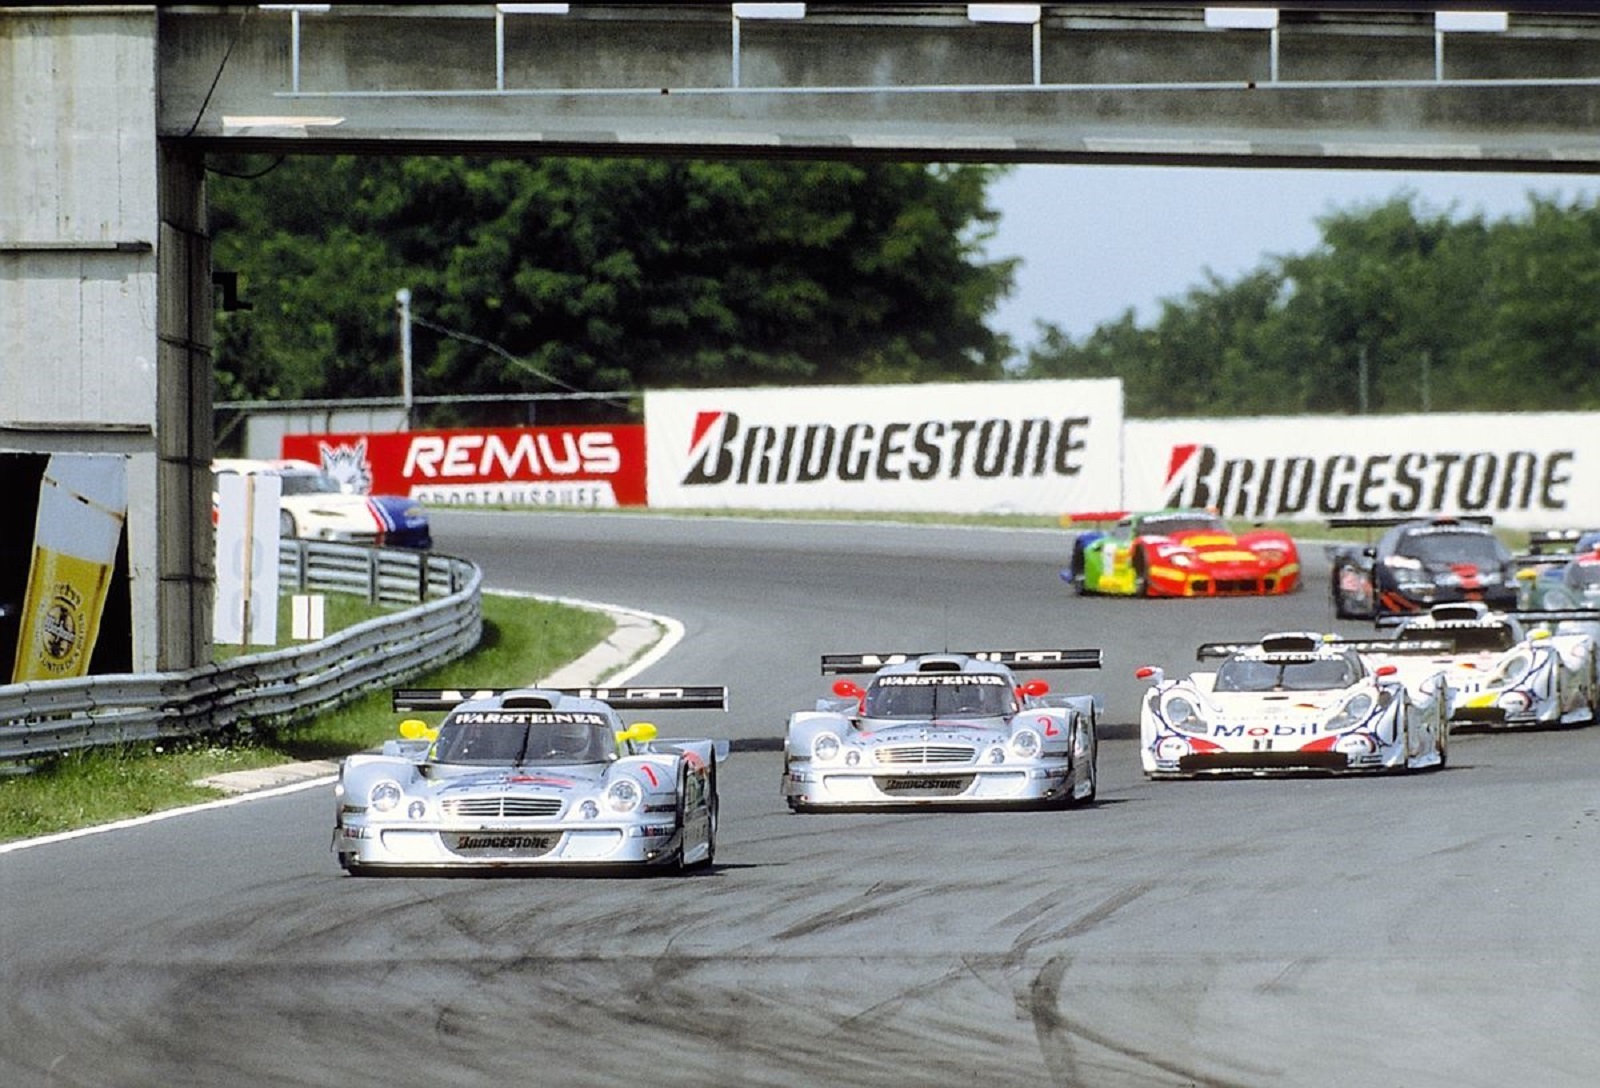 The Mercedes-Benz AMG CLK GTR race cars in action